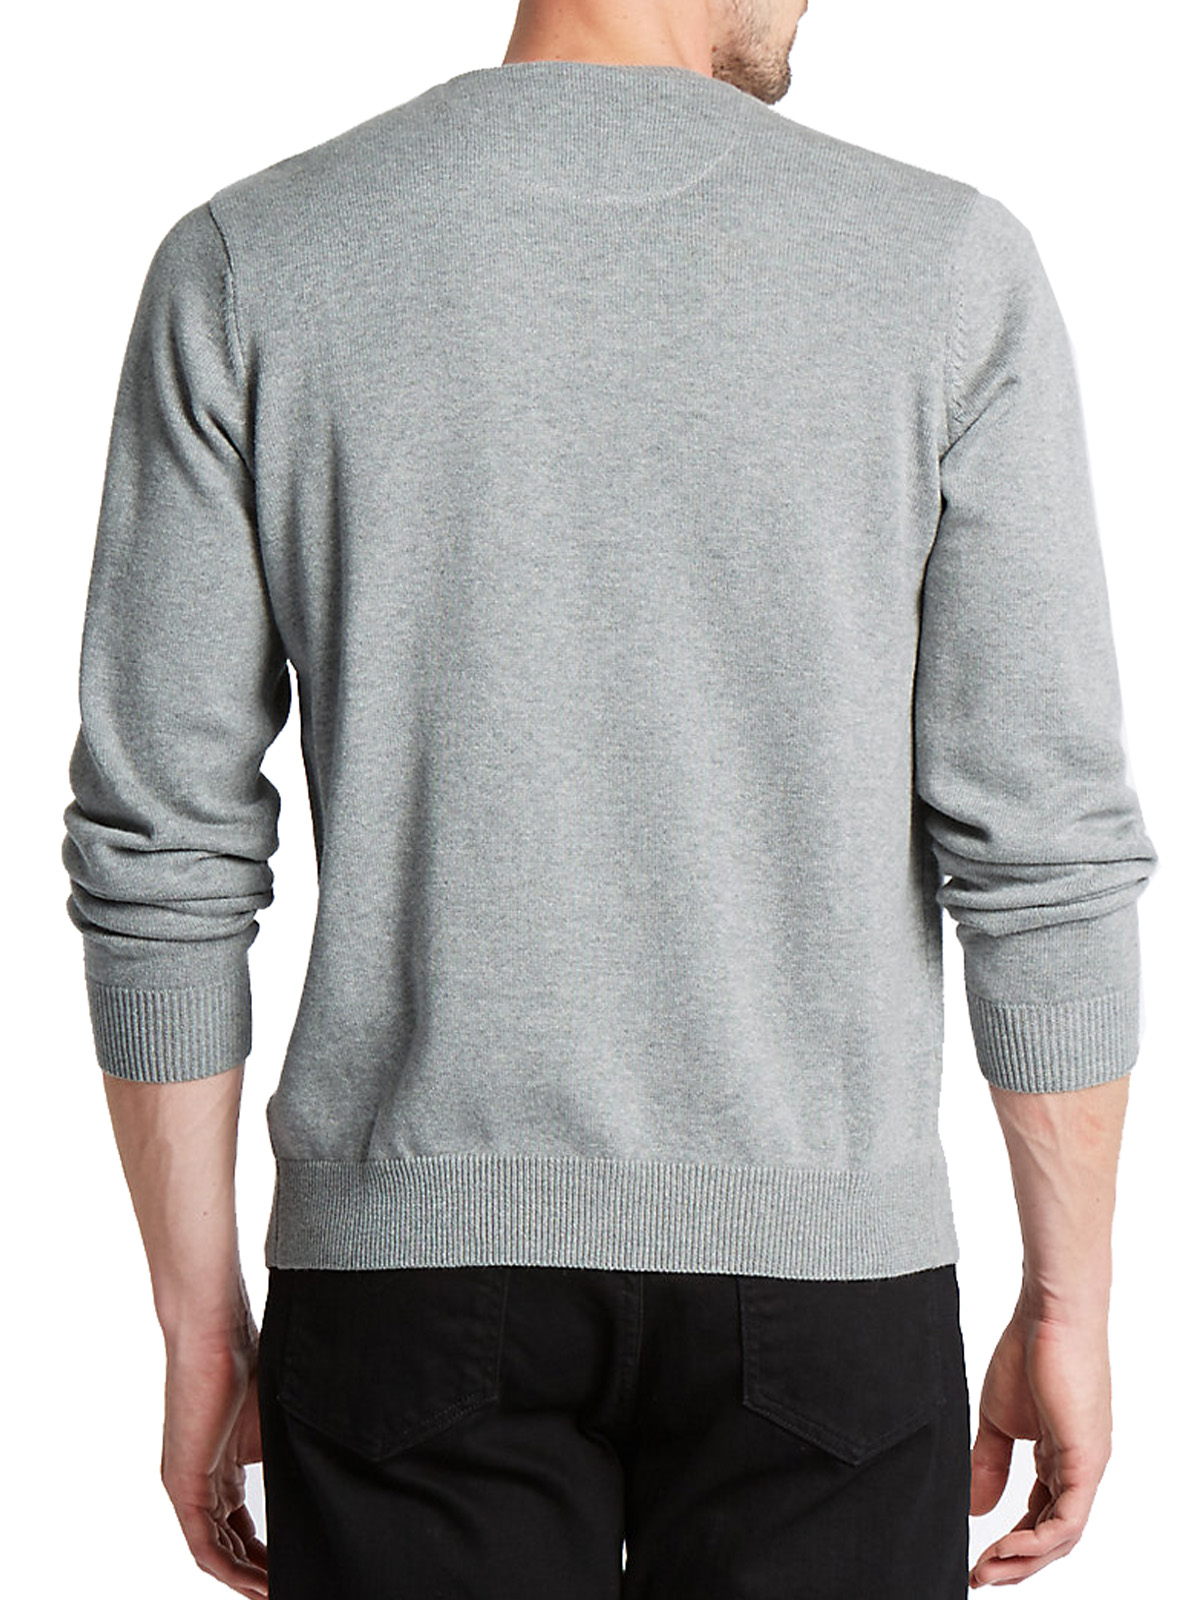 Marks and Spencer - - M&5 LIGHT-GREY Pure Cotton Crew Neck Jumper ...